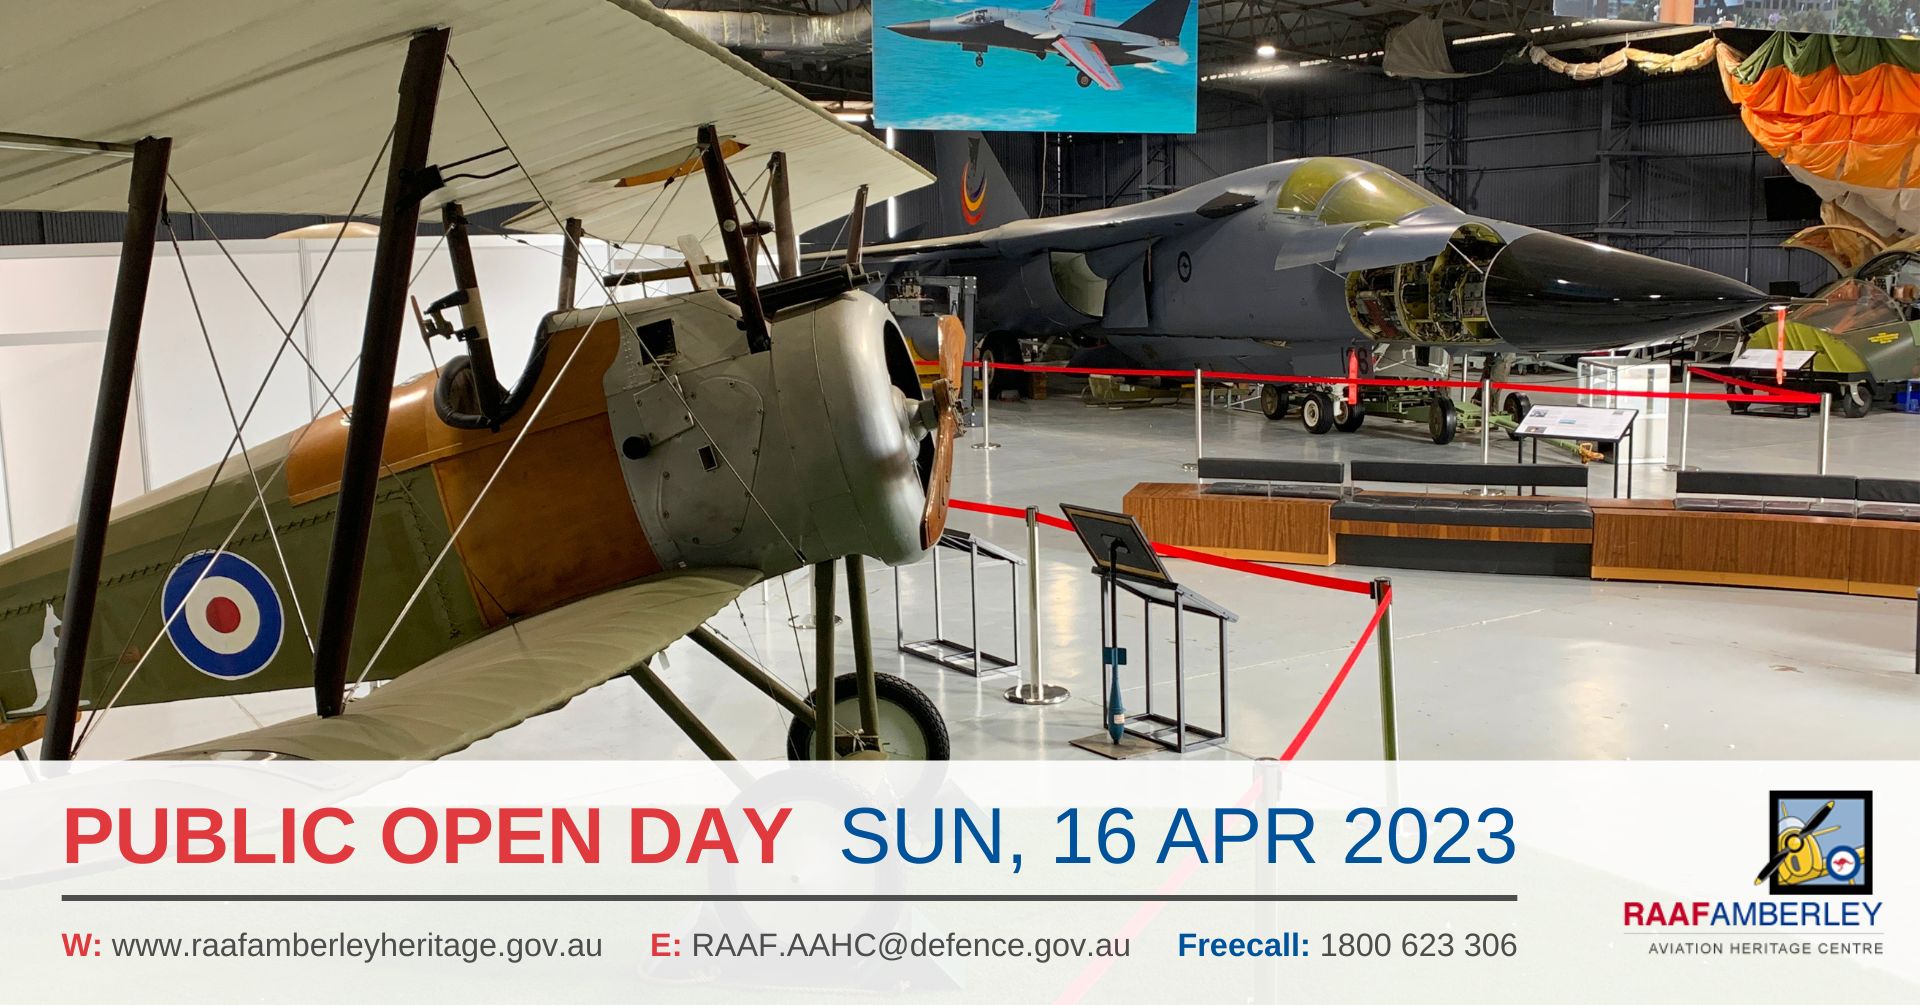 RAAF AAHC - Monthly Sunday Public Open Day - 16 Apr 23